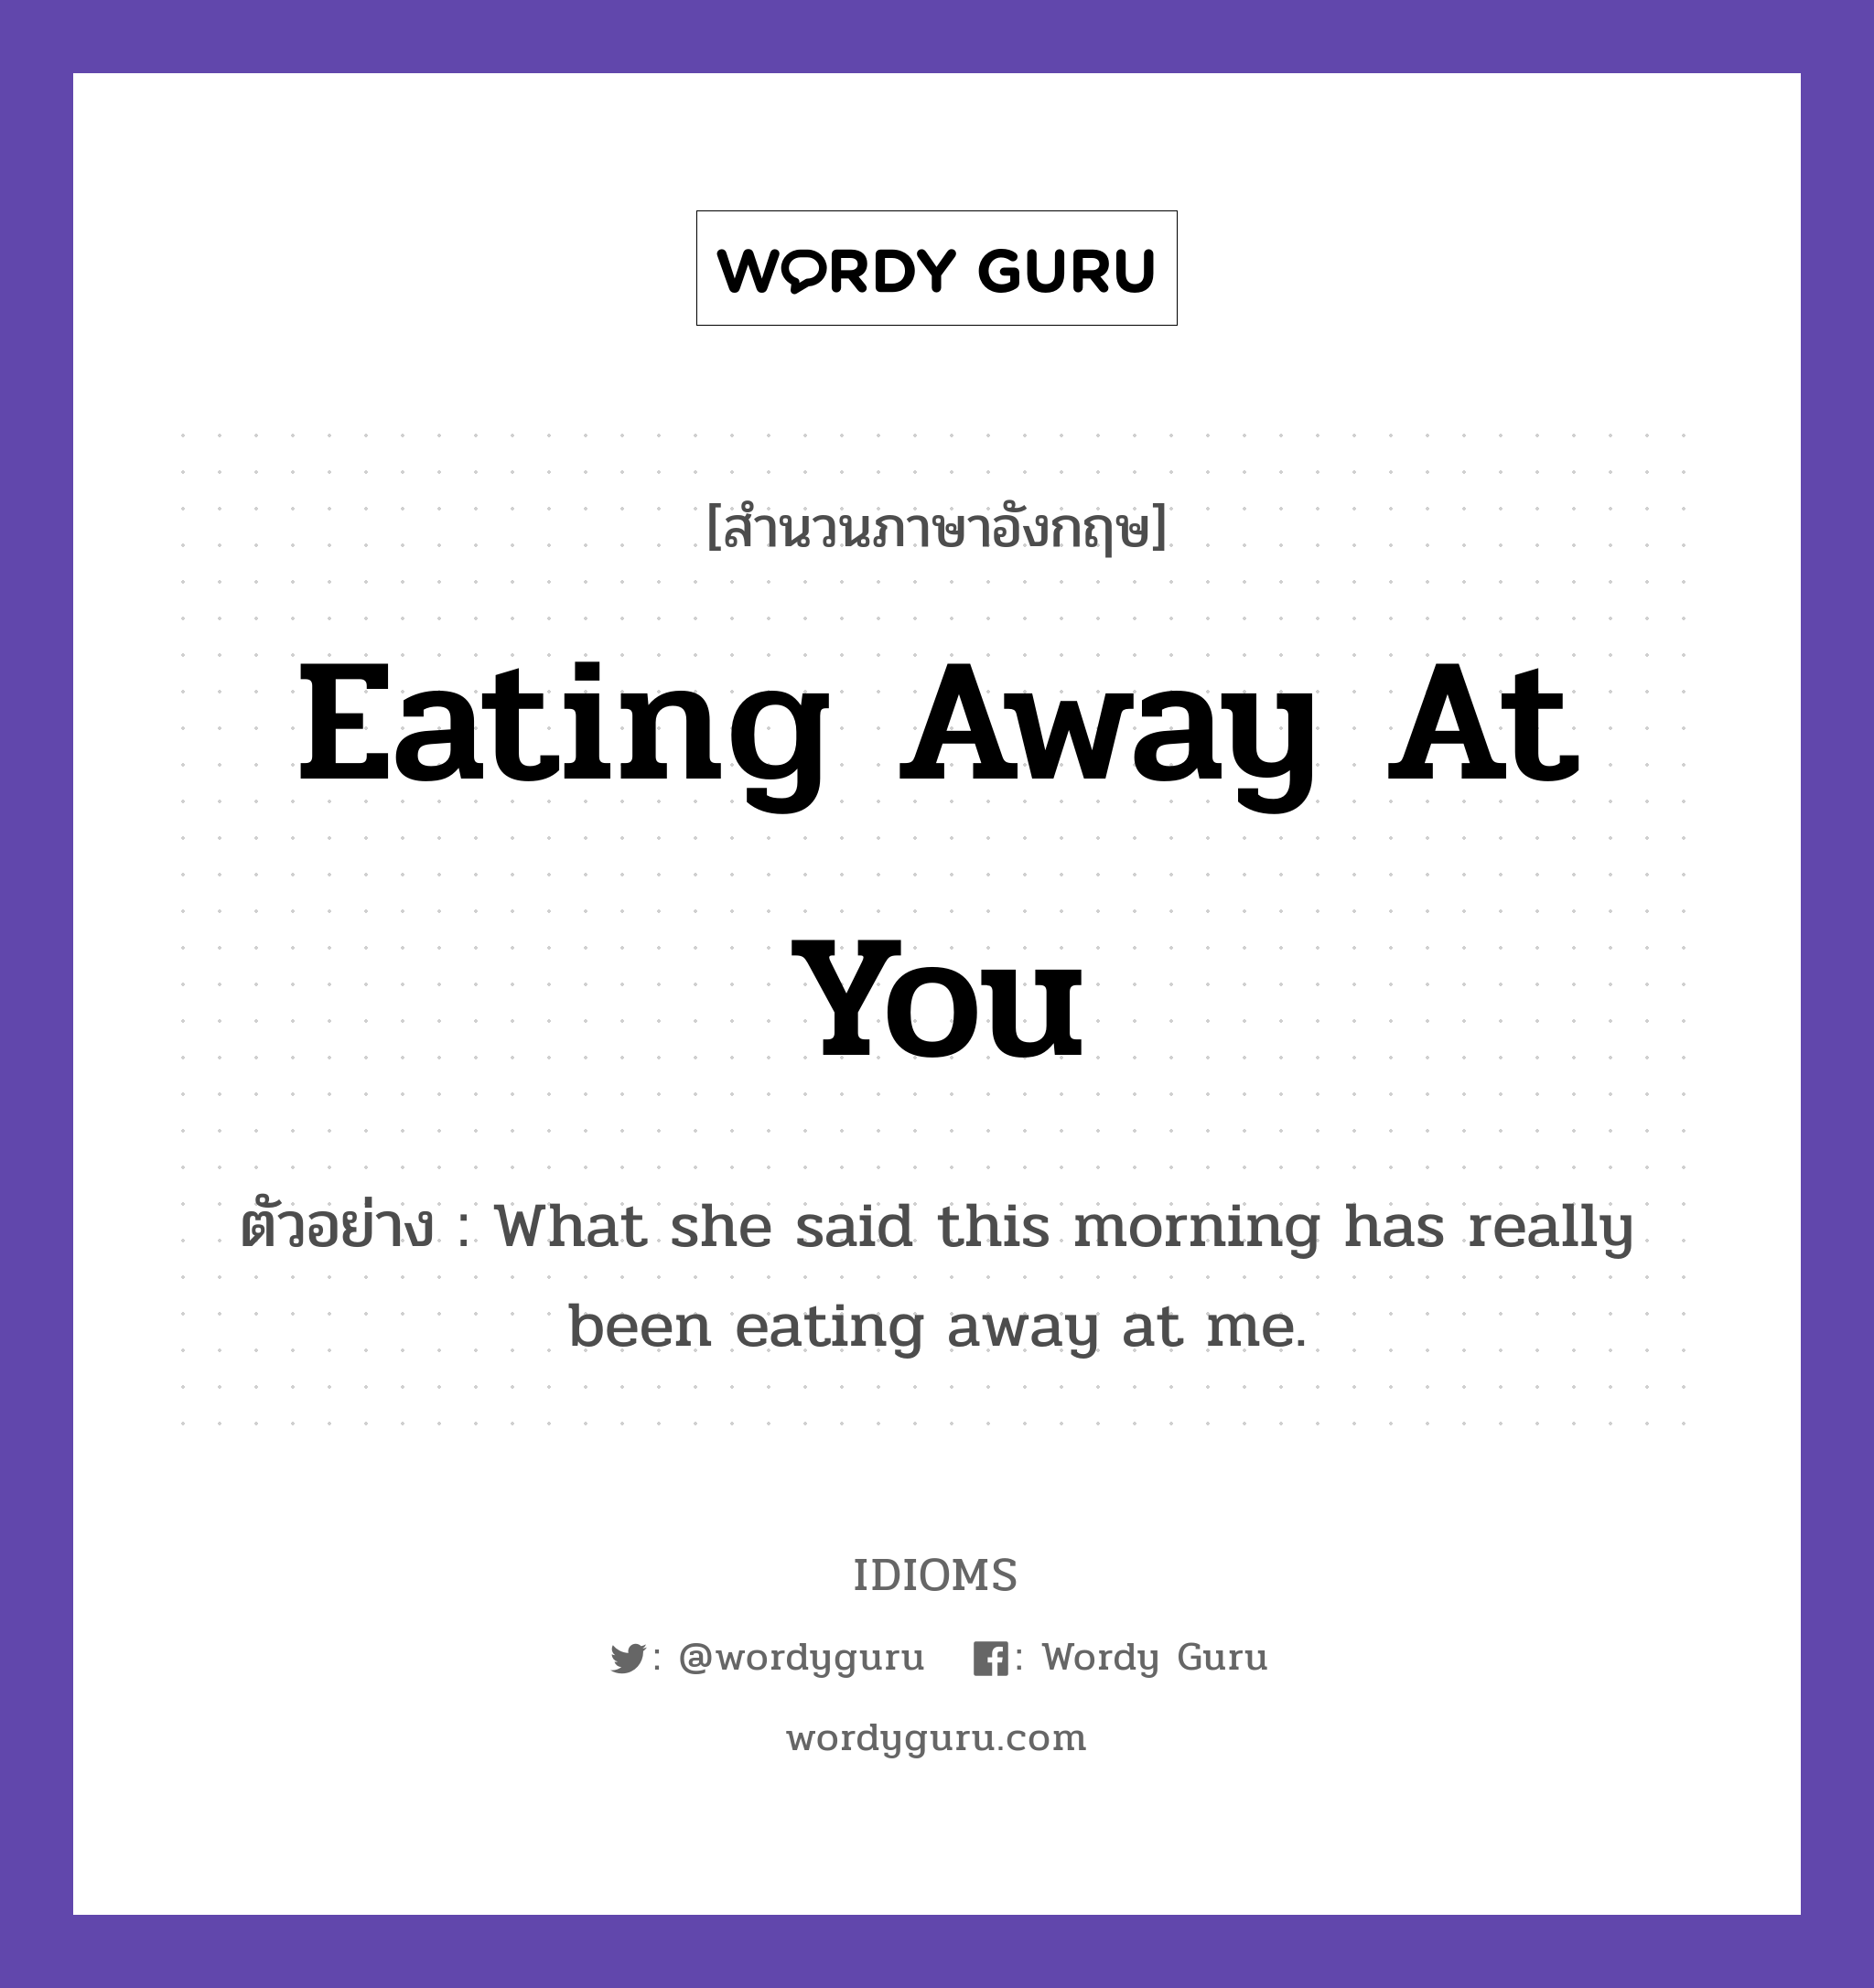 Eating Away At You แปลว่า?, สำนวนภาษาอังกฤษ Eating Away At You ตัวอย่าง What she said this morning has really been eating away at me.